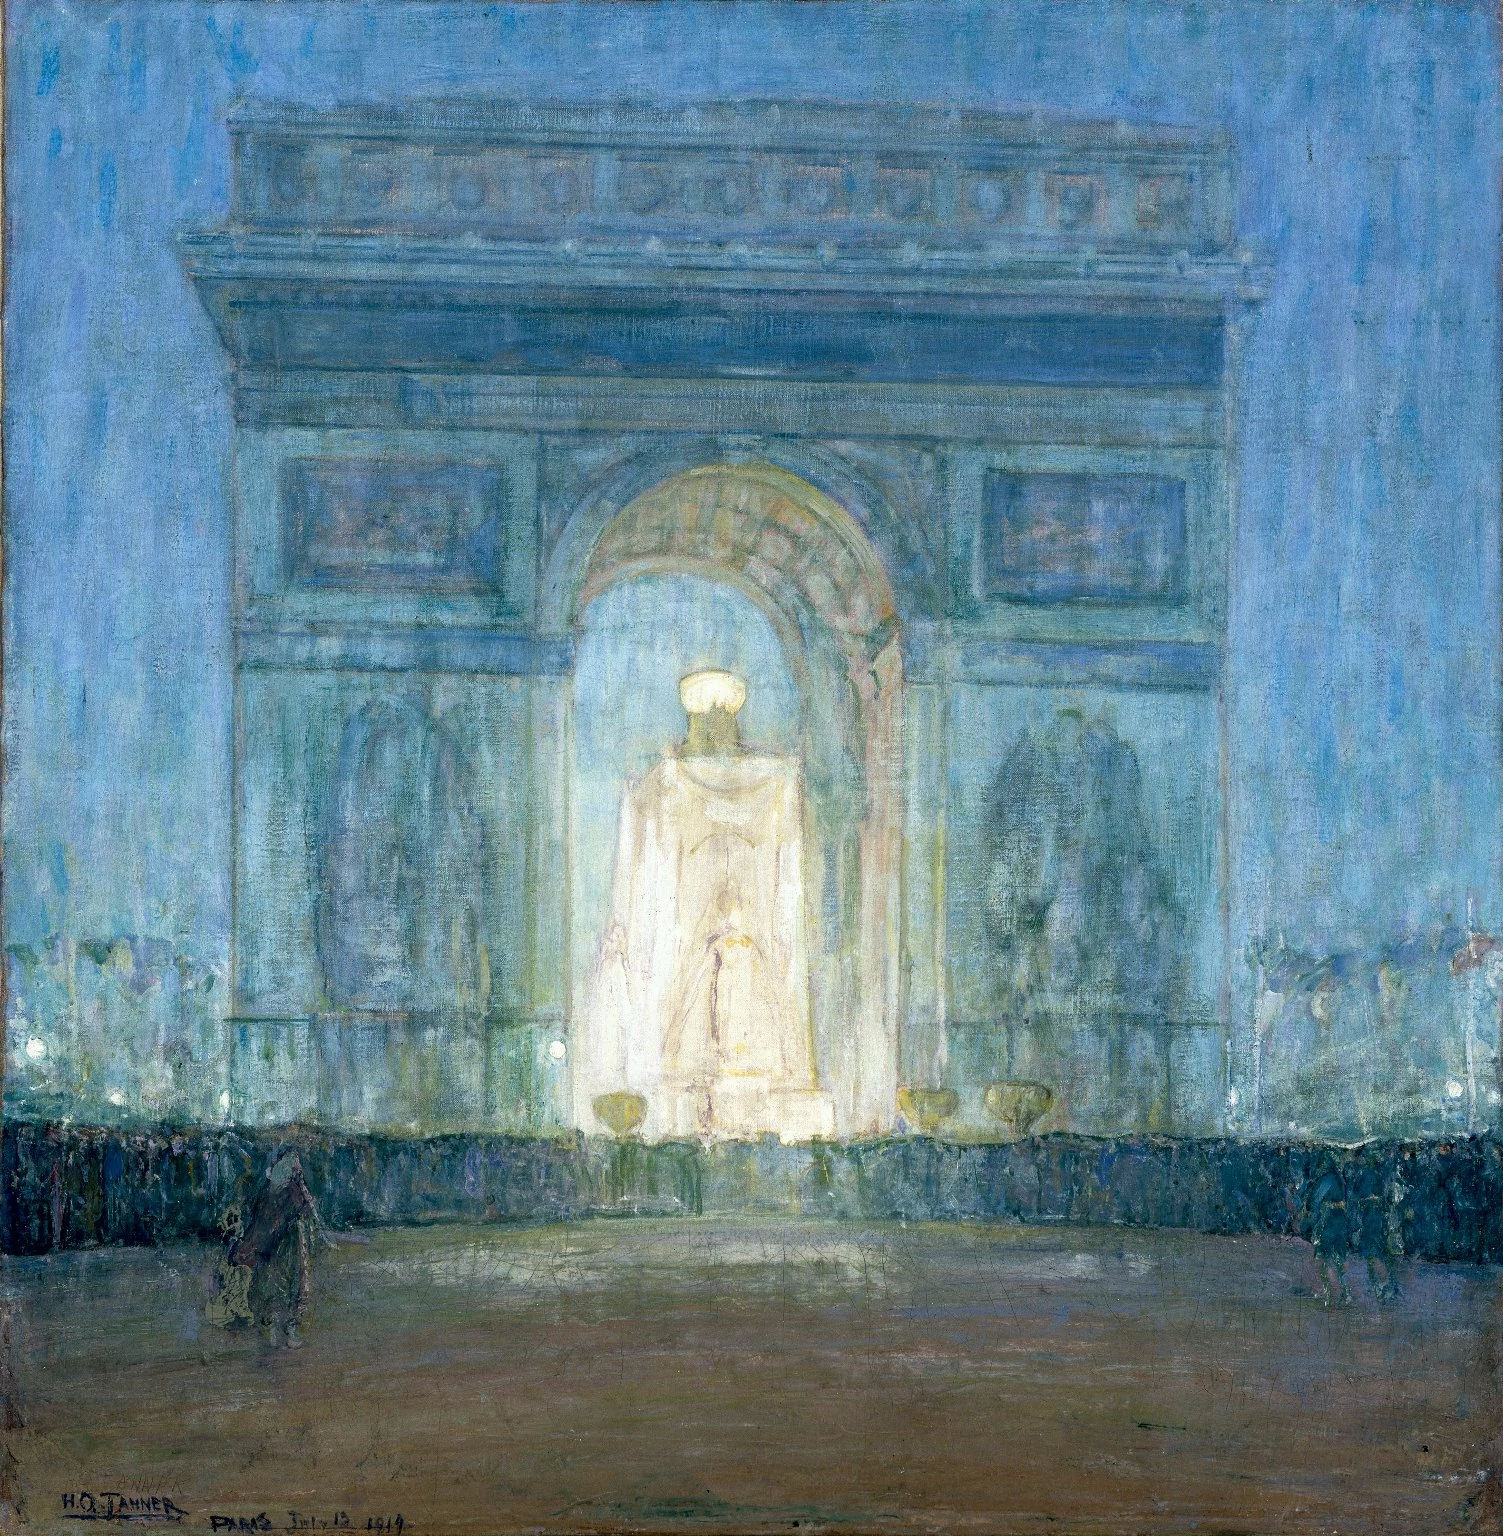 The Arch, Henry Ossawa Tanner